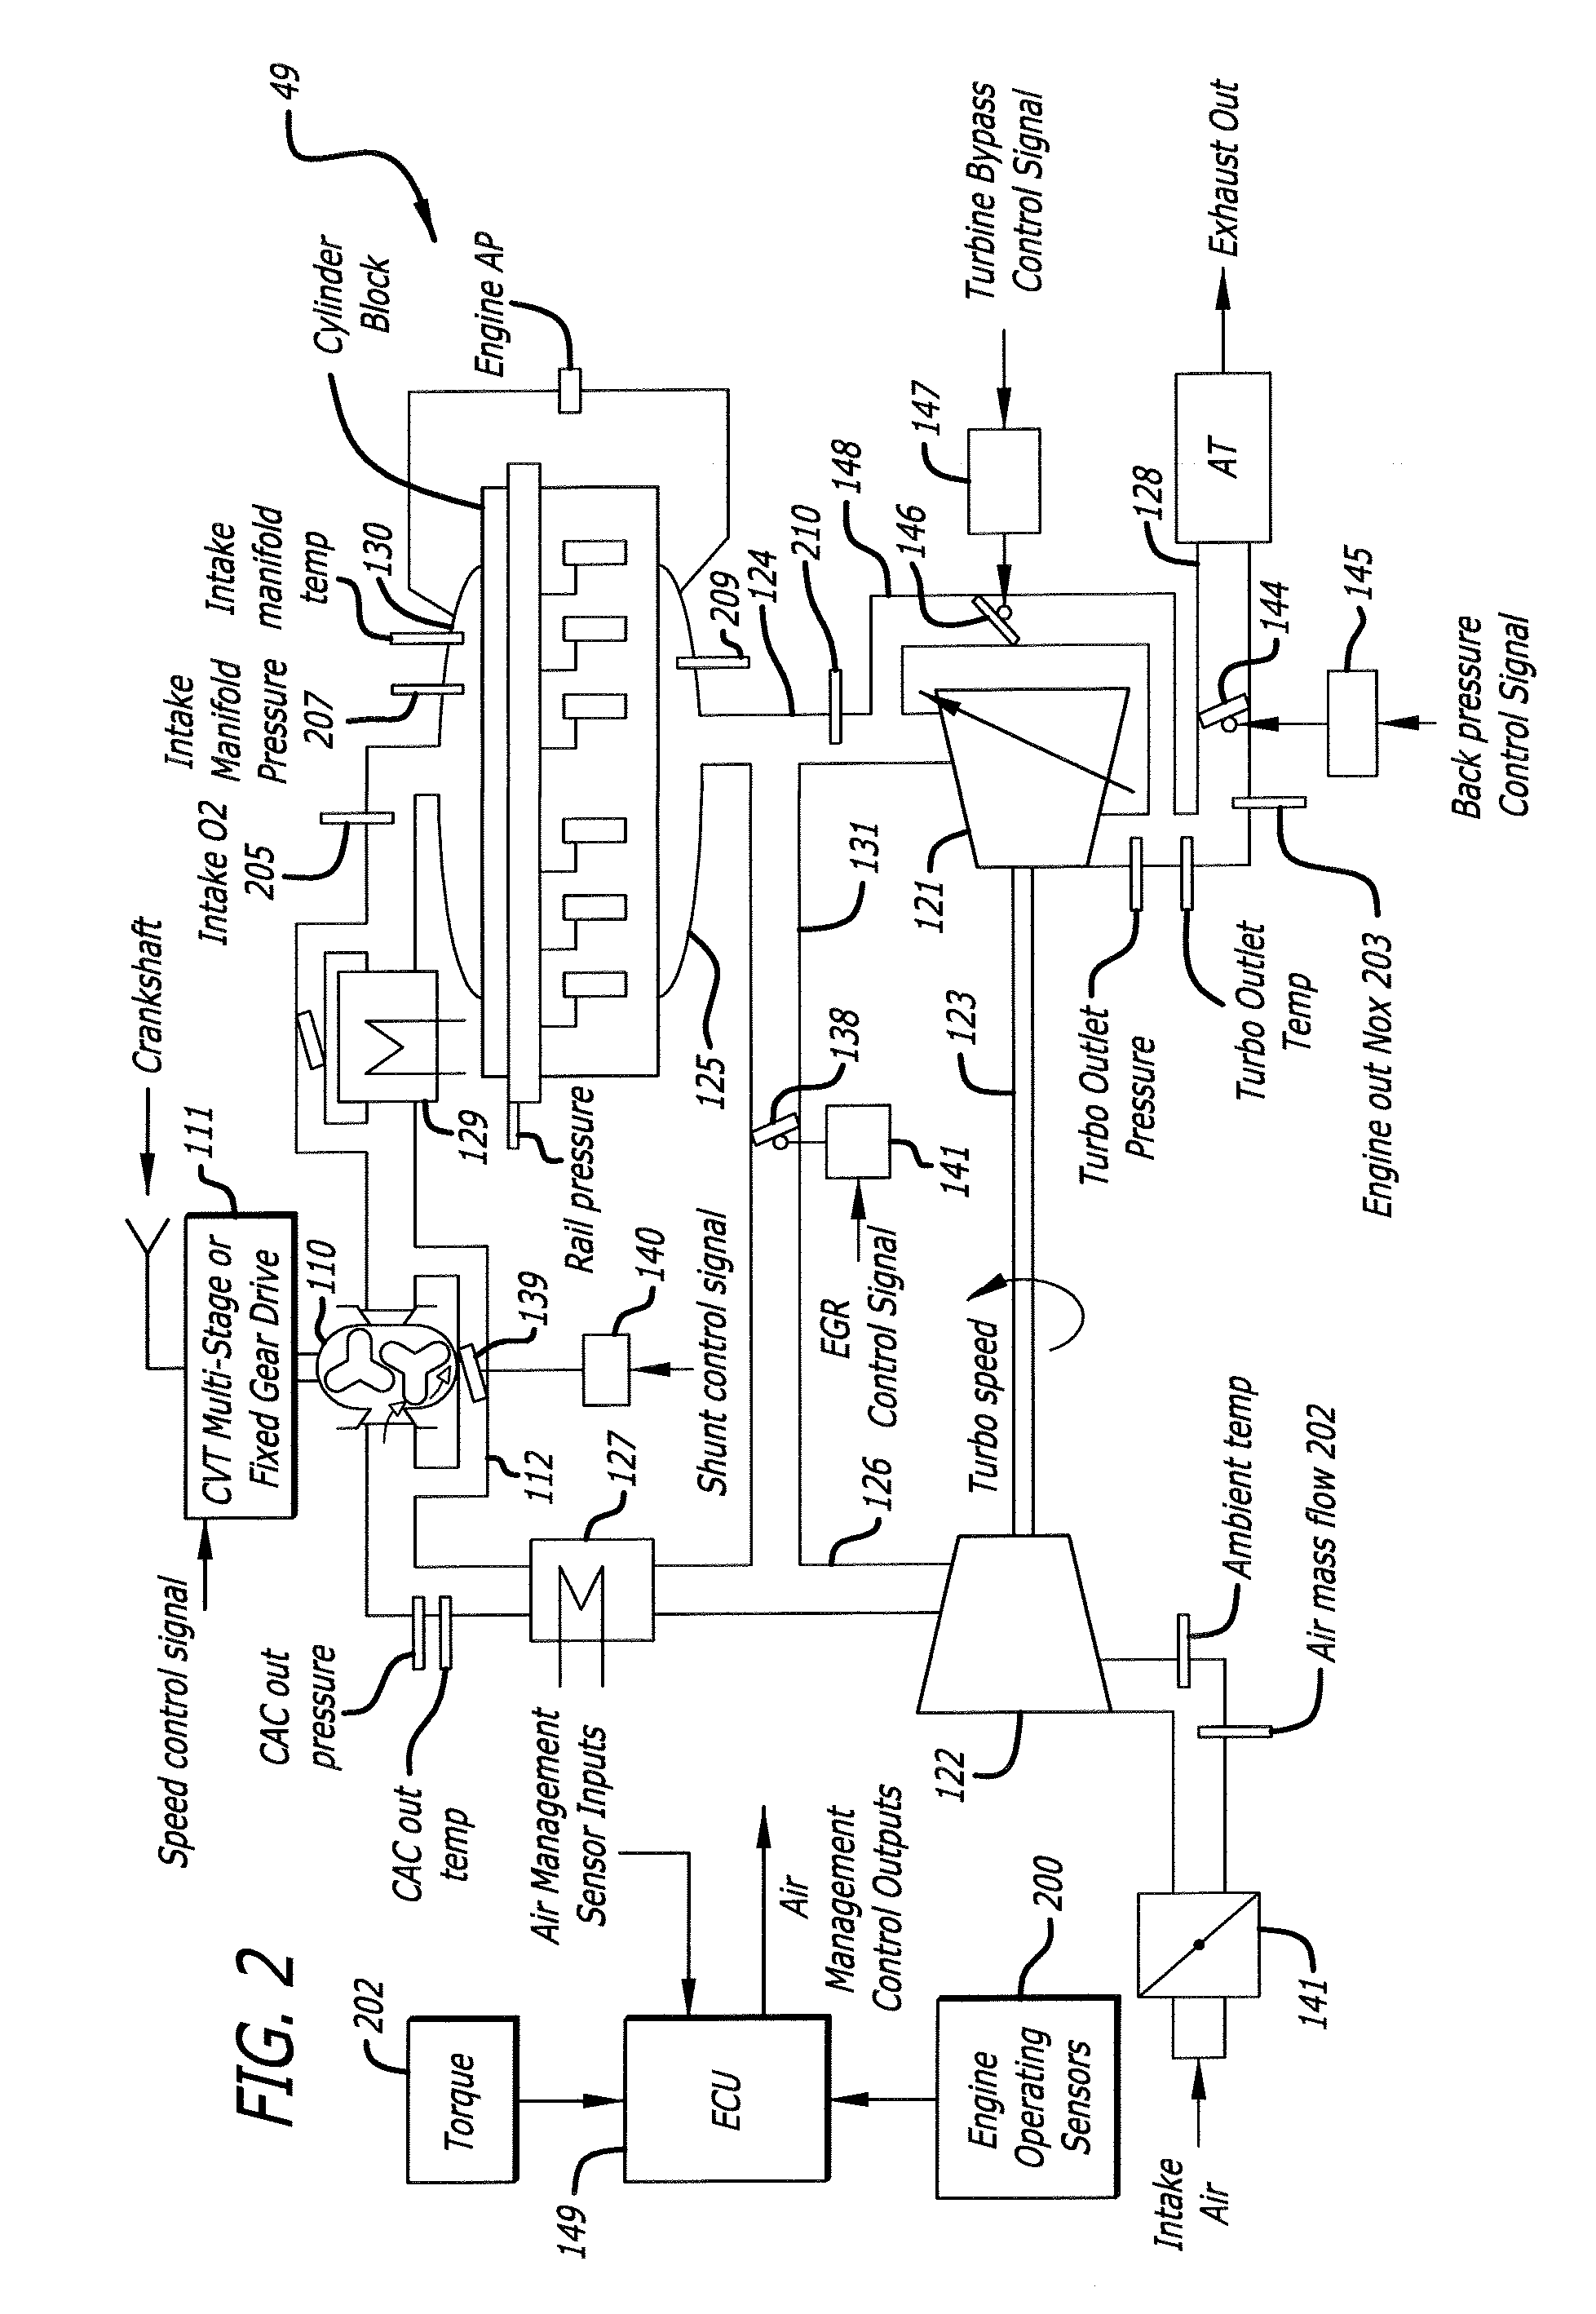 System and Method for Air Handling Control in Opposed-Piston Engines with Uniflow Scavenging